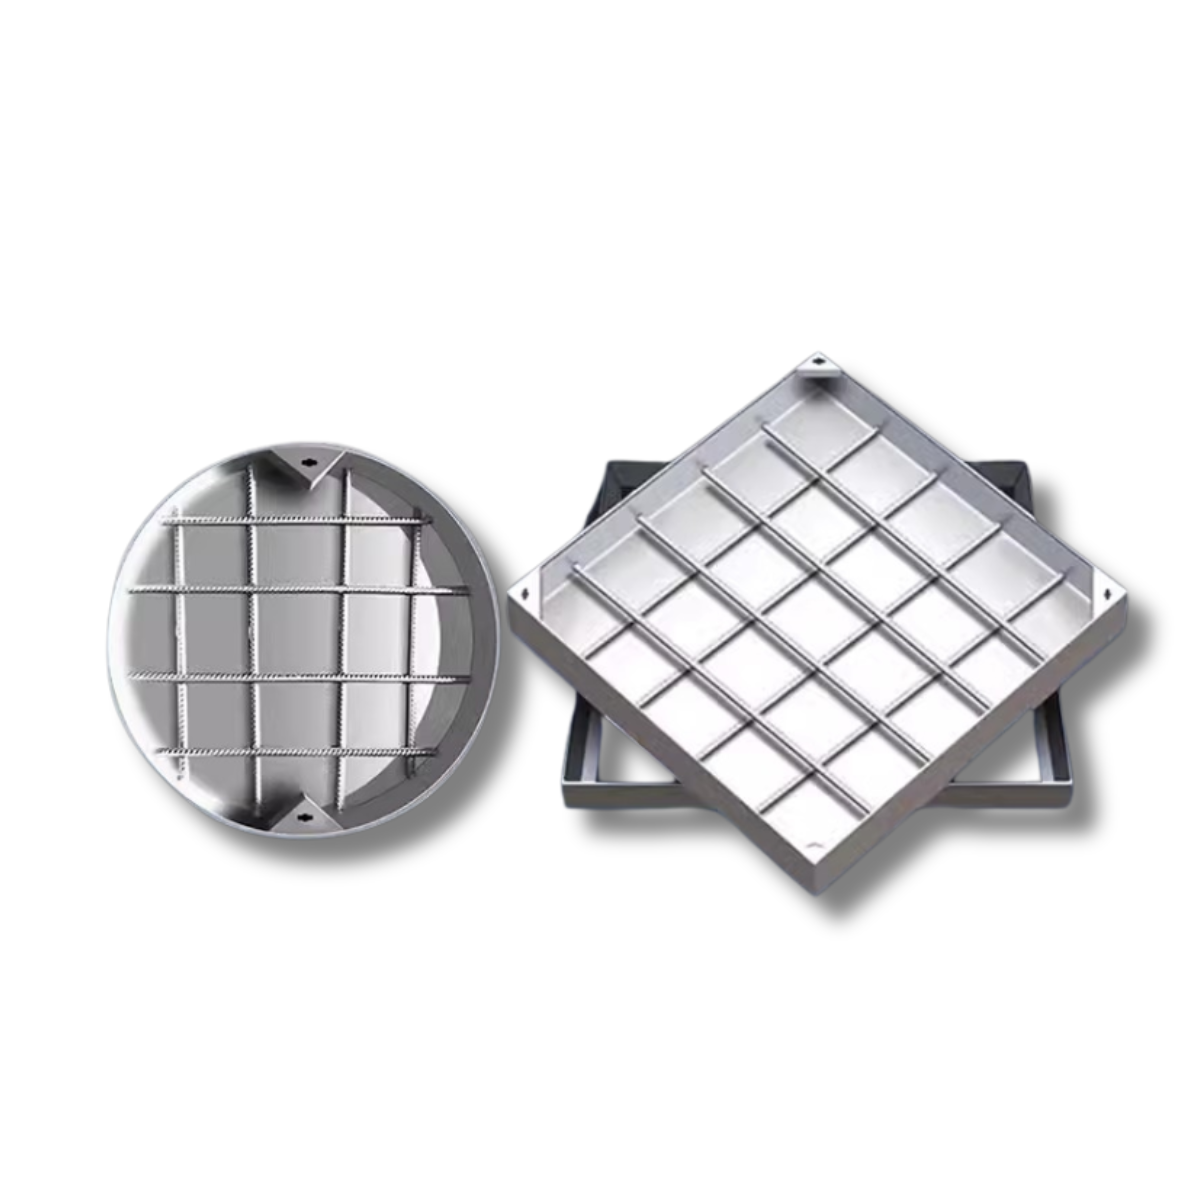 Stainless steel invisible manhole cover Drain cover Manhole cover 201 Square decorative rain manhole cover